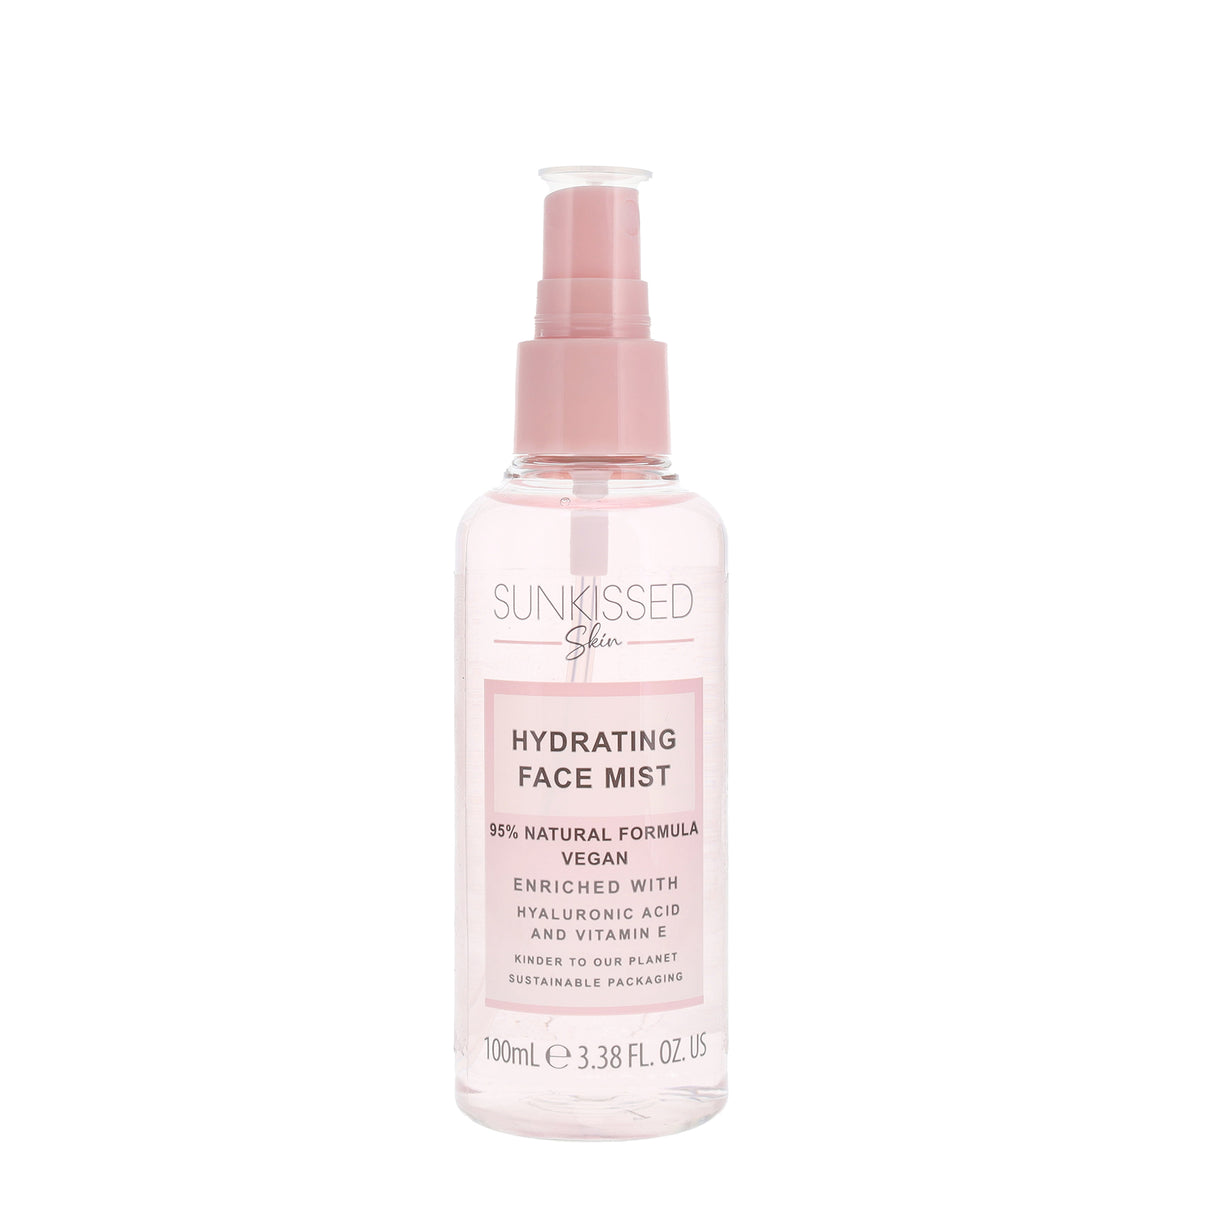 Sunkissed Hydrating Face Mist, 100ml